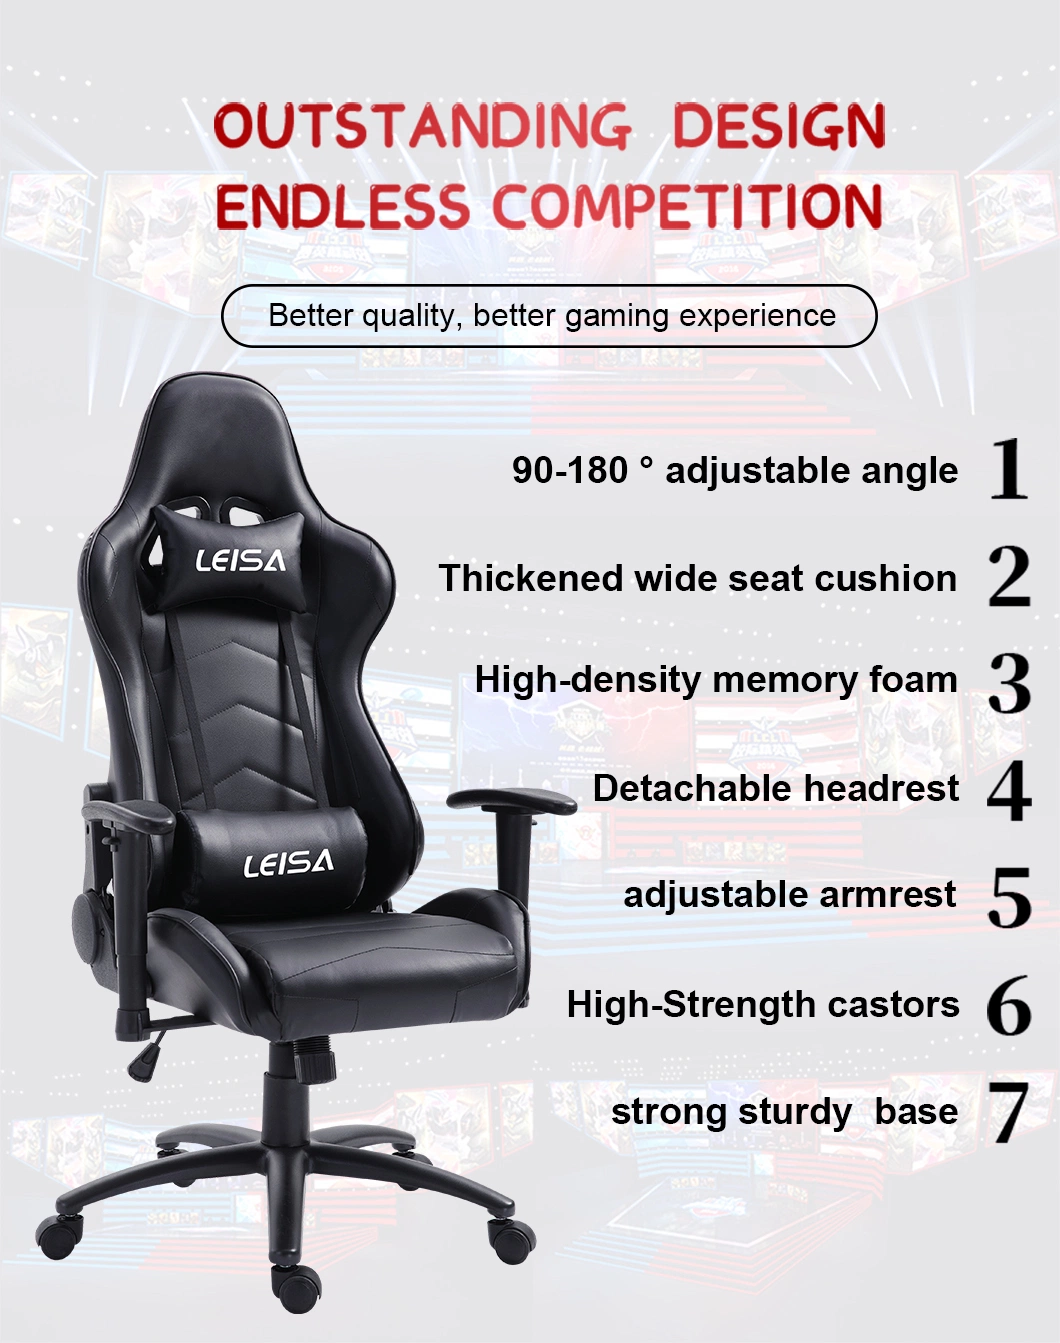 Home Leisure Ergonomic Swivel Chair Sleeping Game Chair Office Gaming Chair with Armrests